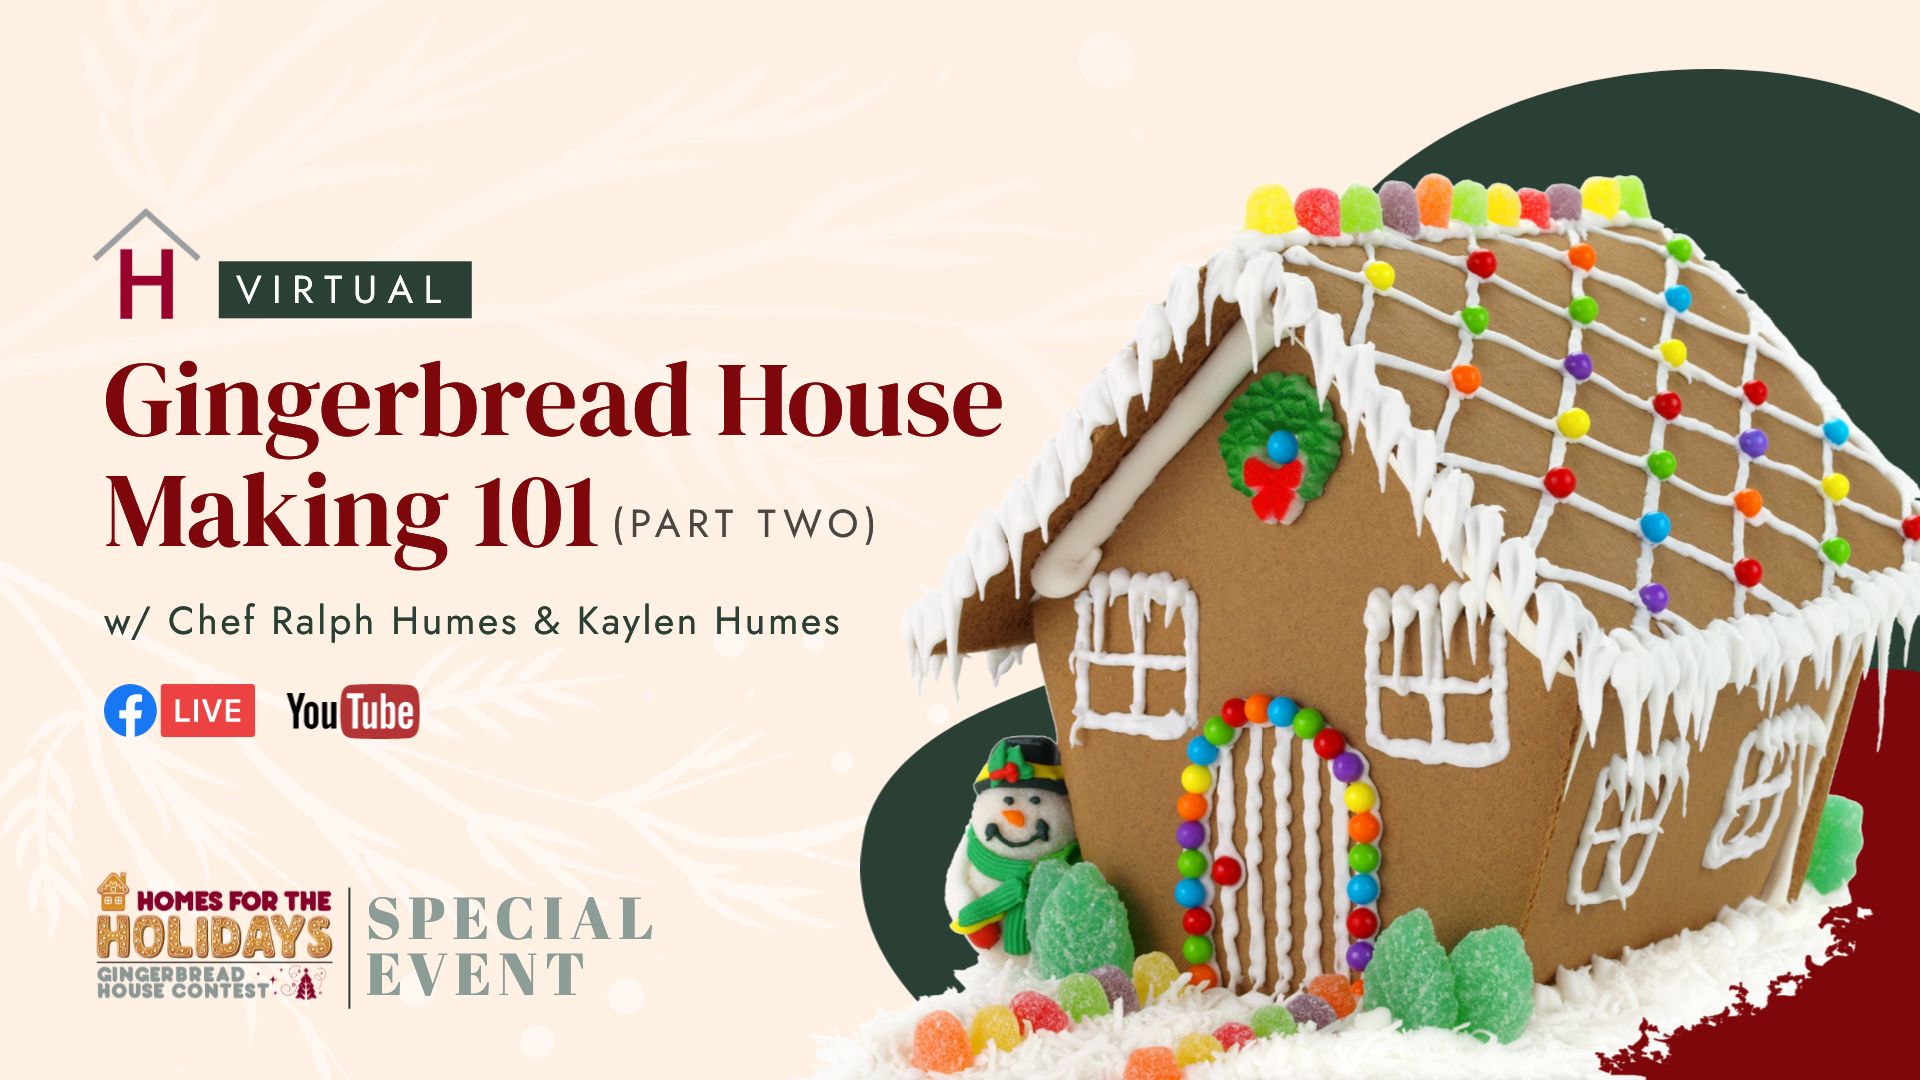 Gingerbread House Making 101 Part two